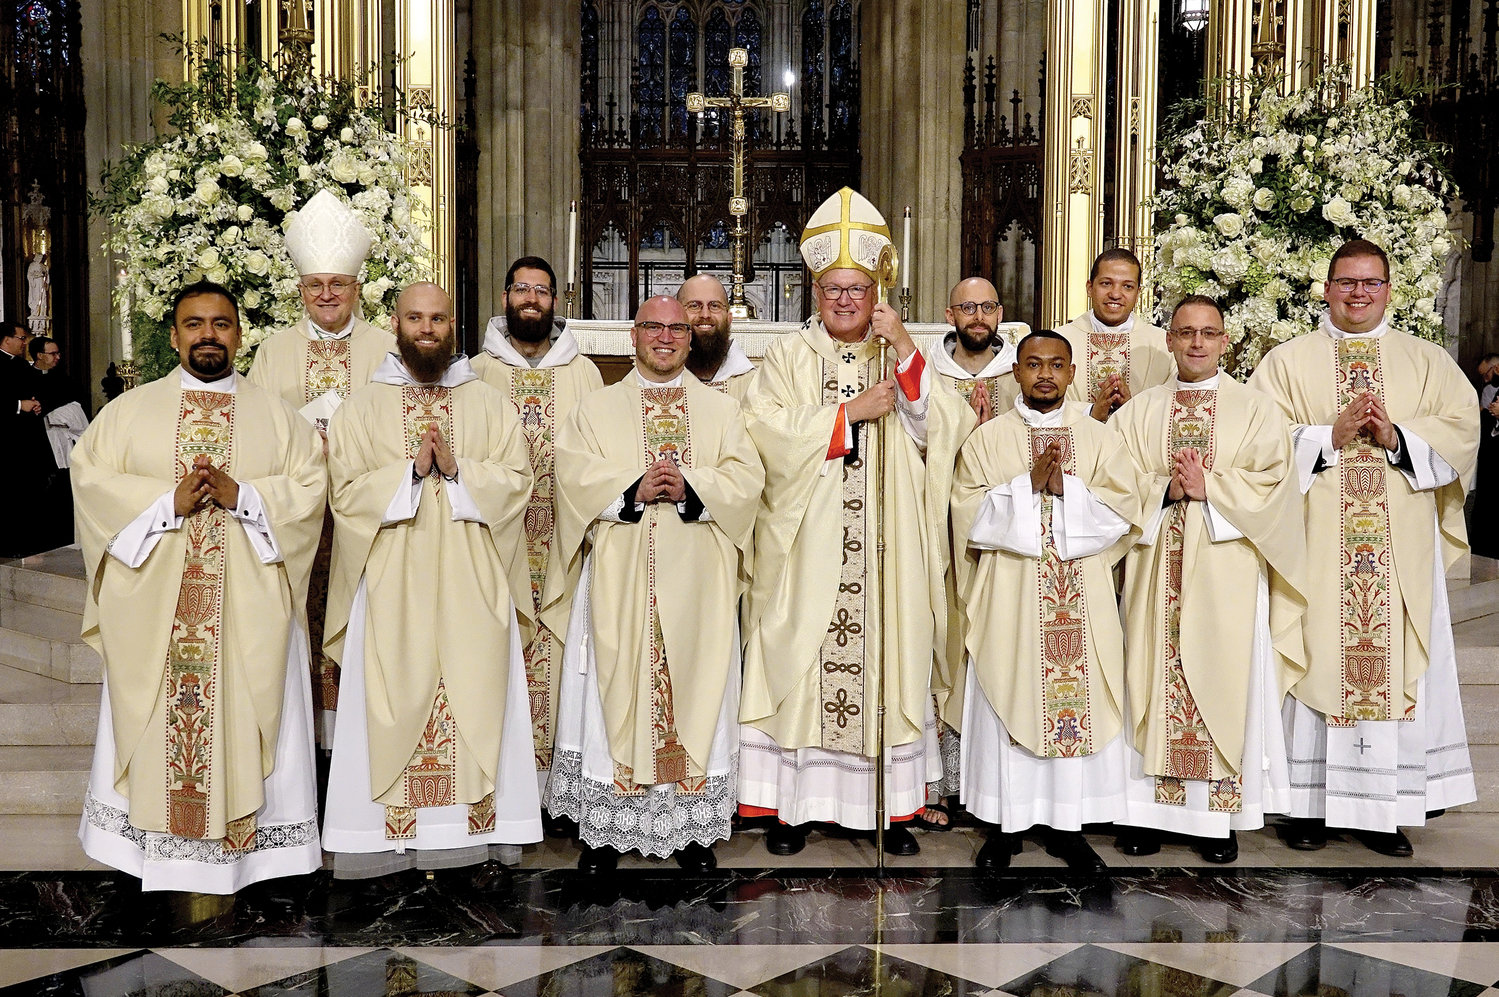 Joining Cardinal Dolan after the Mass of Ordination were the 10 men he ordained. First row, from left, were Father Kevin Panemeño, Father Elijah Marie Perri, C.F.R., Father Robert Carolan, Cardinal Dolan, Father Wesbee Victor, Father Carmine Caruso and Father Matthew Breslin. Back row, from left, were Auxiliary Bishop James Massa of Brooklyn, the rector of St. Joseph’s Seminary, Dunwoodie, Father Joseph Michael Fino, C.F.R., Father Ignatius Pio Mariae Doherty, C.F.R., Father Frantisek Marie Chloupek, C.F.R., and Father Steven Gonzalez.